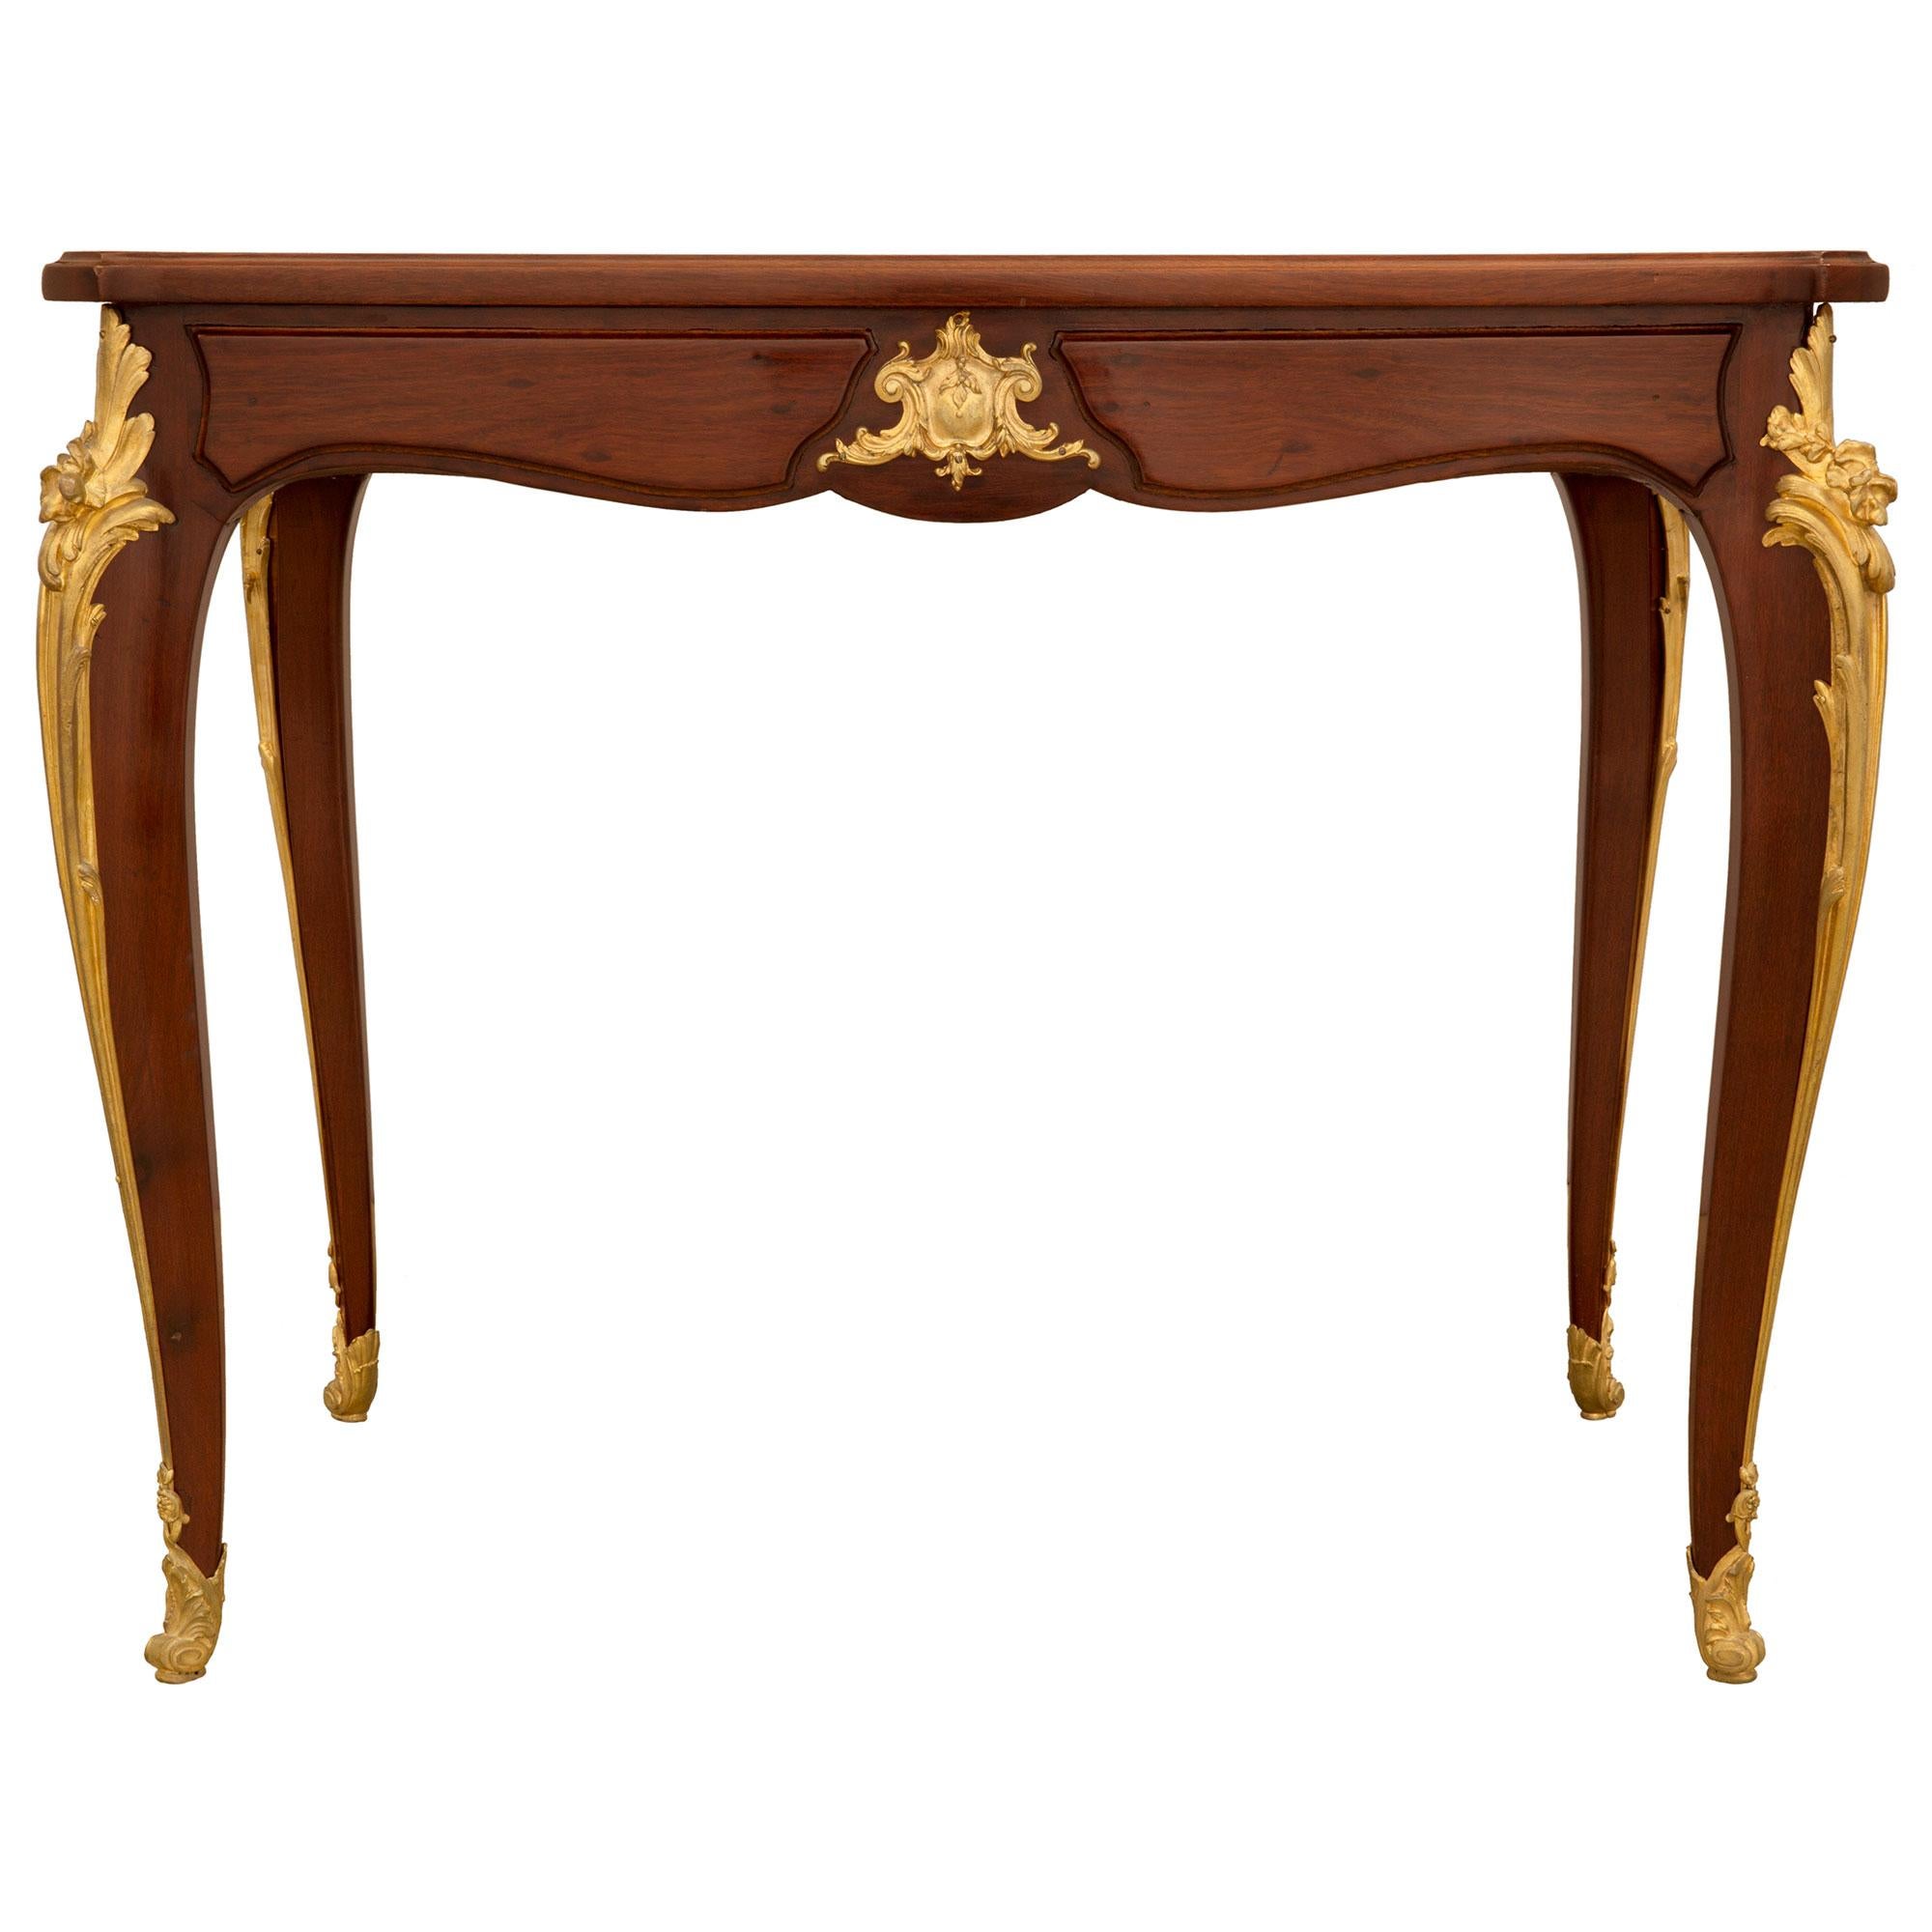 French 19th Century Louis XV Style Mahogany and Ormolu Center Table/Desk For Sale 3